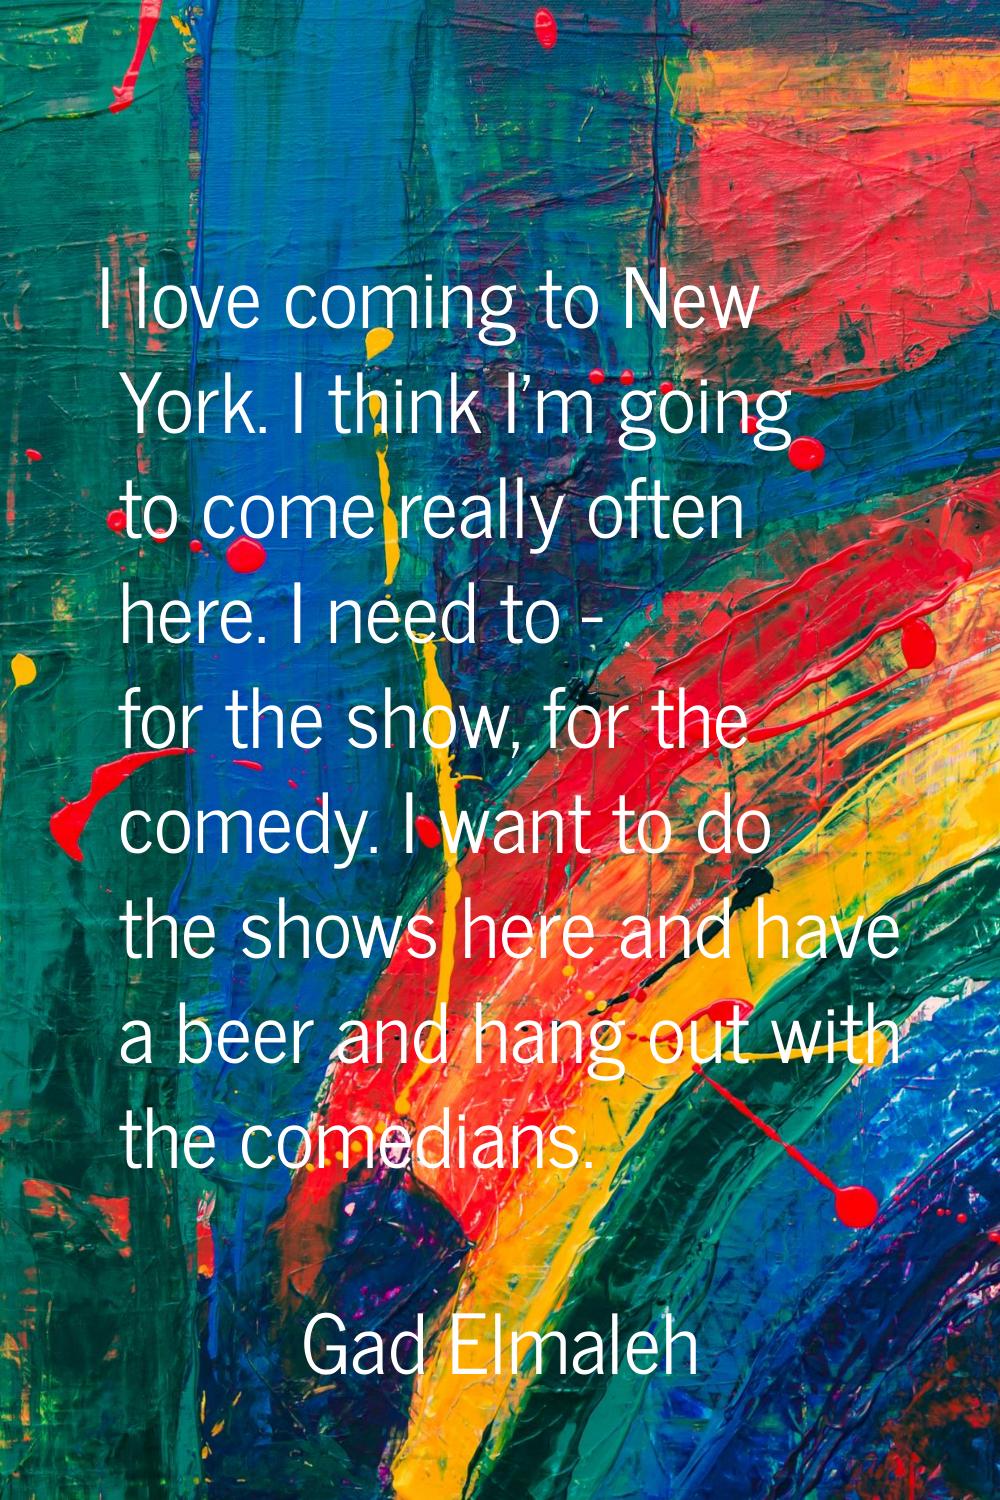 I love coming to New York. I think I'm going to come really often here. I need to - for the show, f